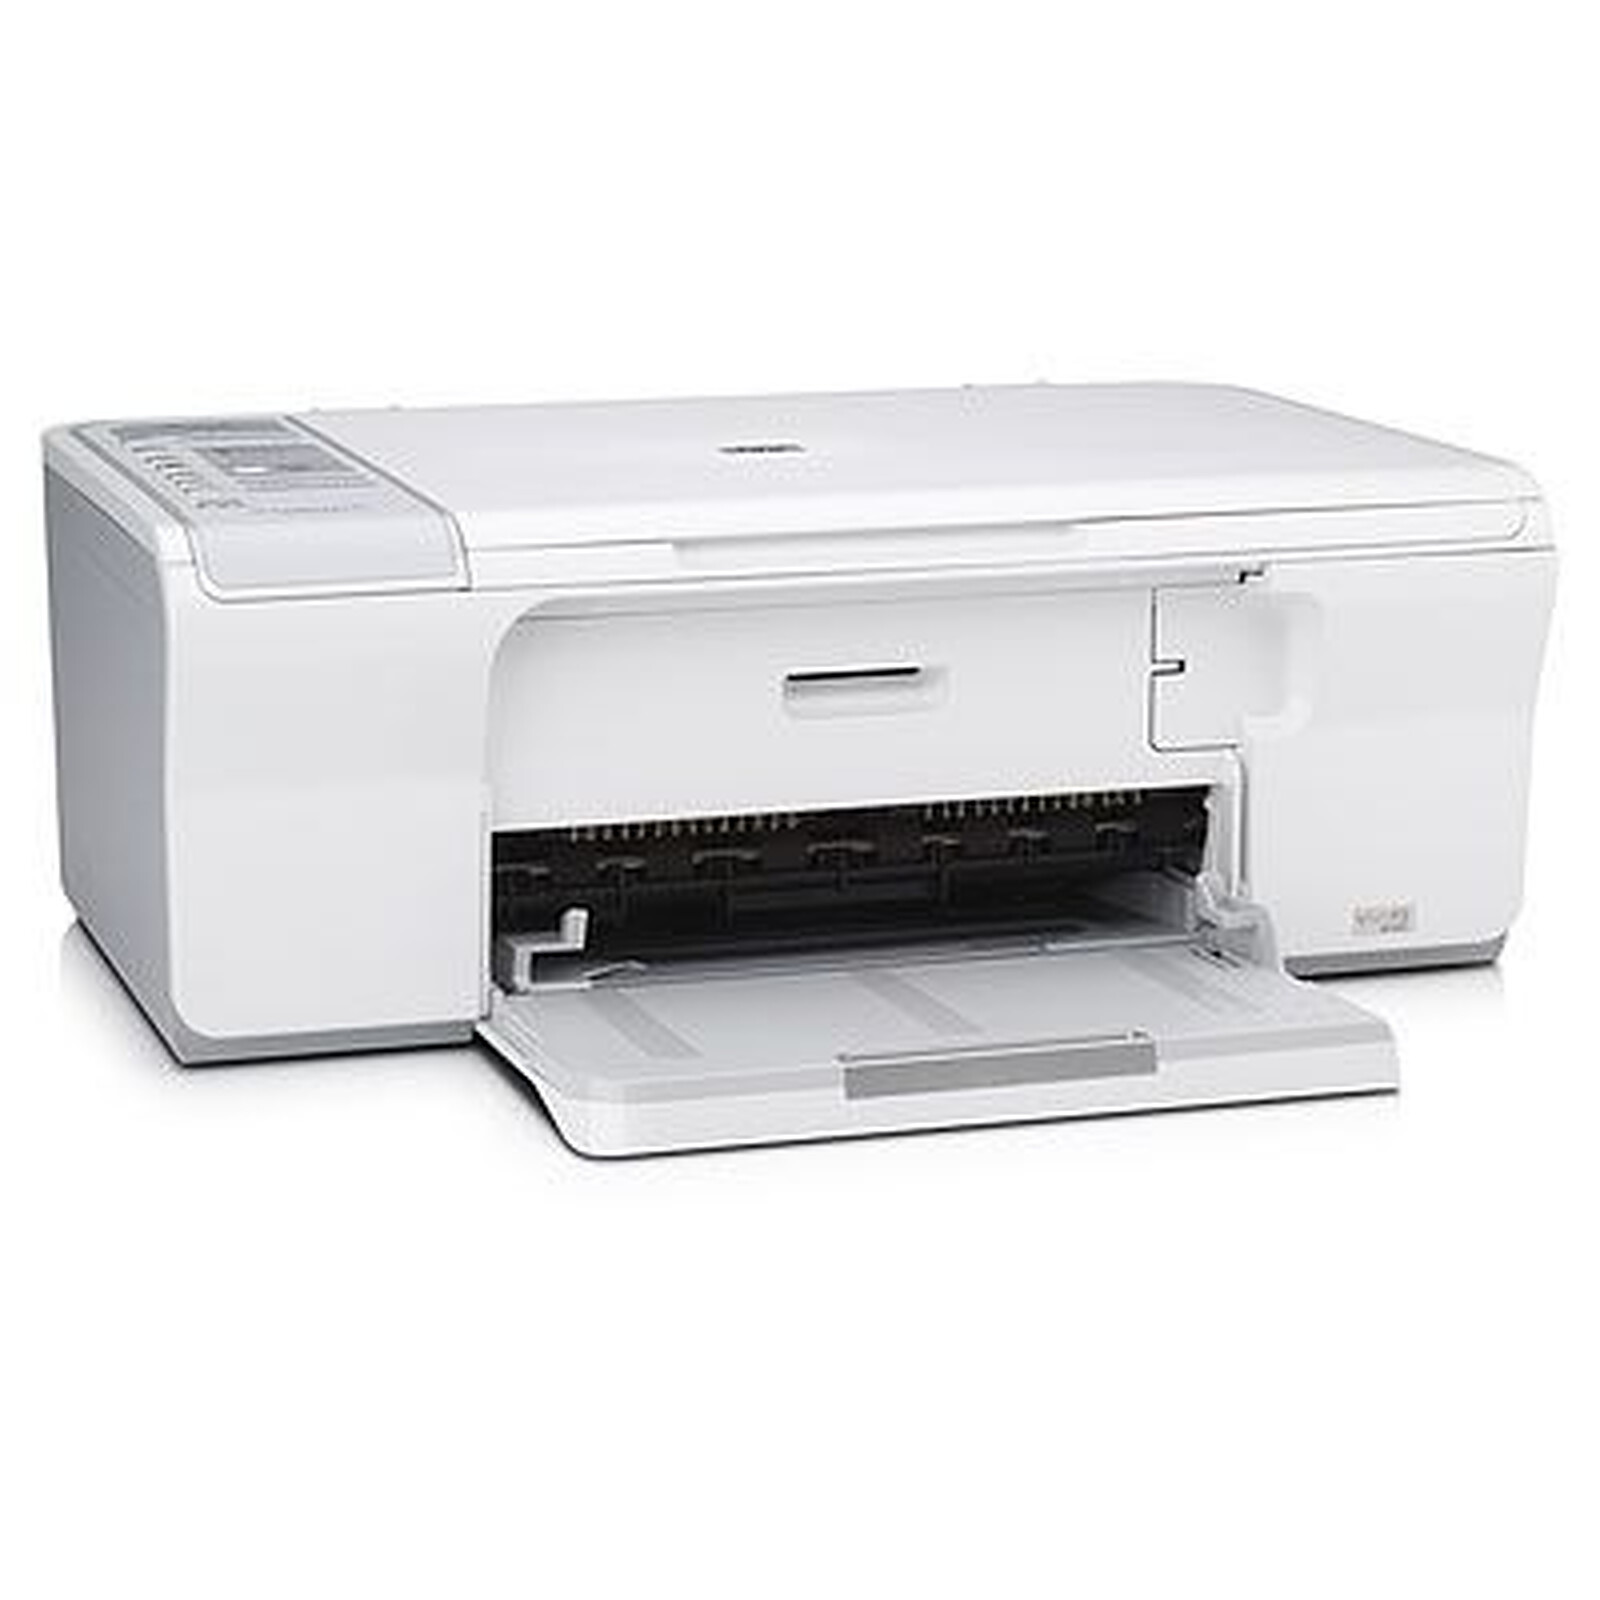 Ù…Ø´Ø§ÙƒÙ„ Ø·Ø§Ø¨Ø¹Ø© Hp Deskjet F4280 Hp Deskjet F4280 All In One Inkjet Copier Scanner And Printer Please Select File For View And Download Sample Product Tupperware